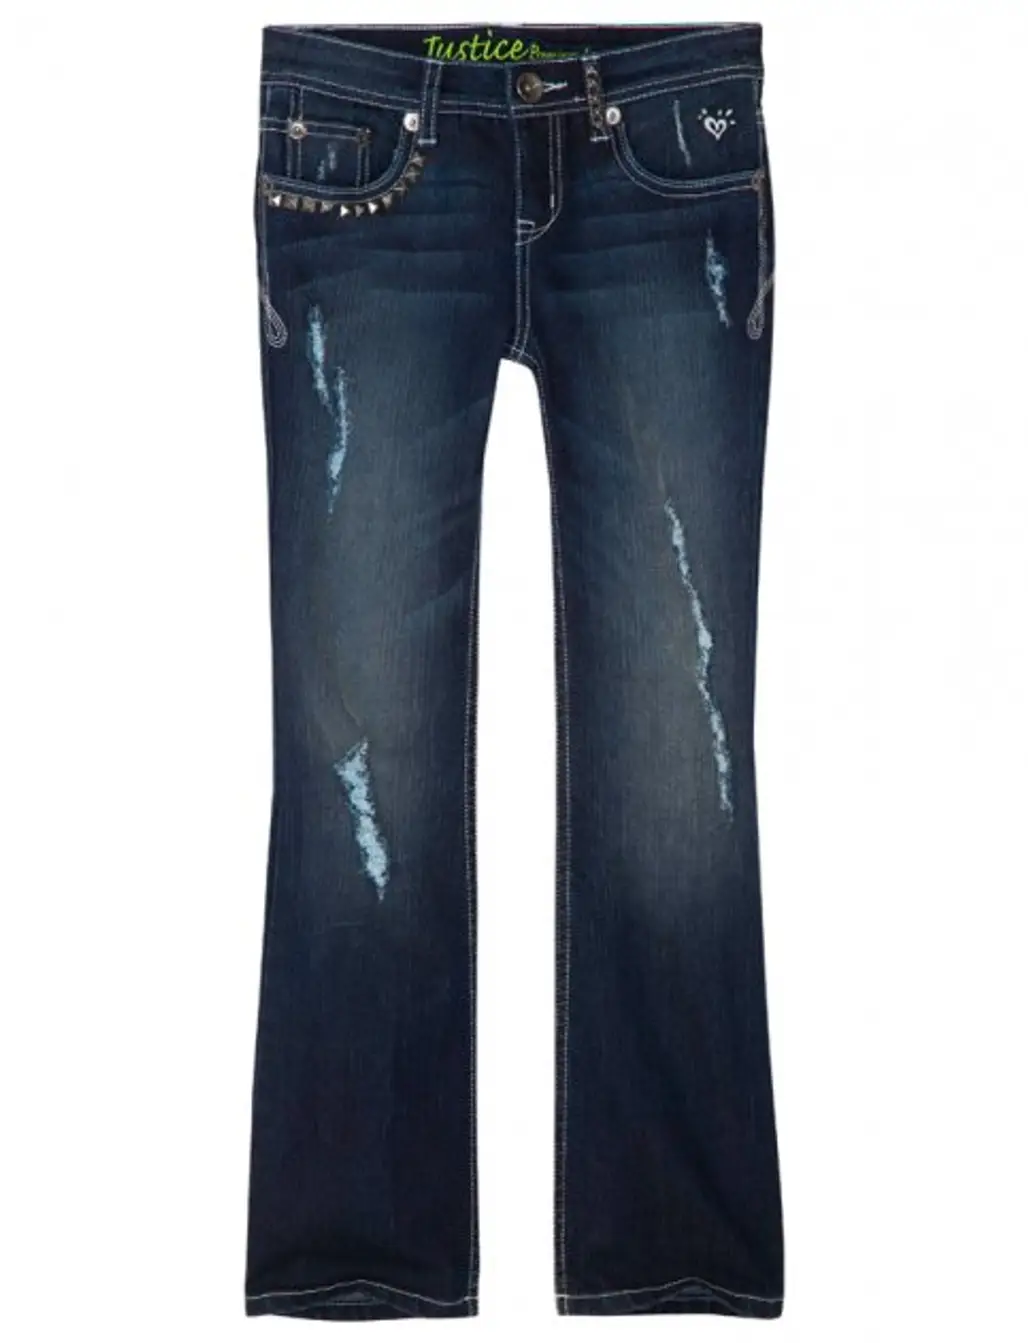 Justice for Girls Pyramid Stud Destroyed Boot Cut Jean